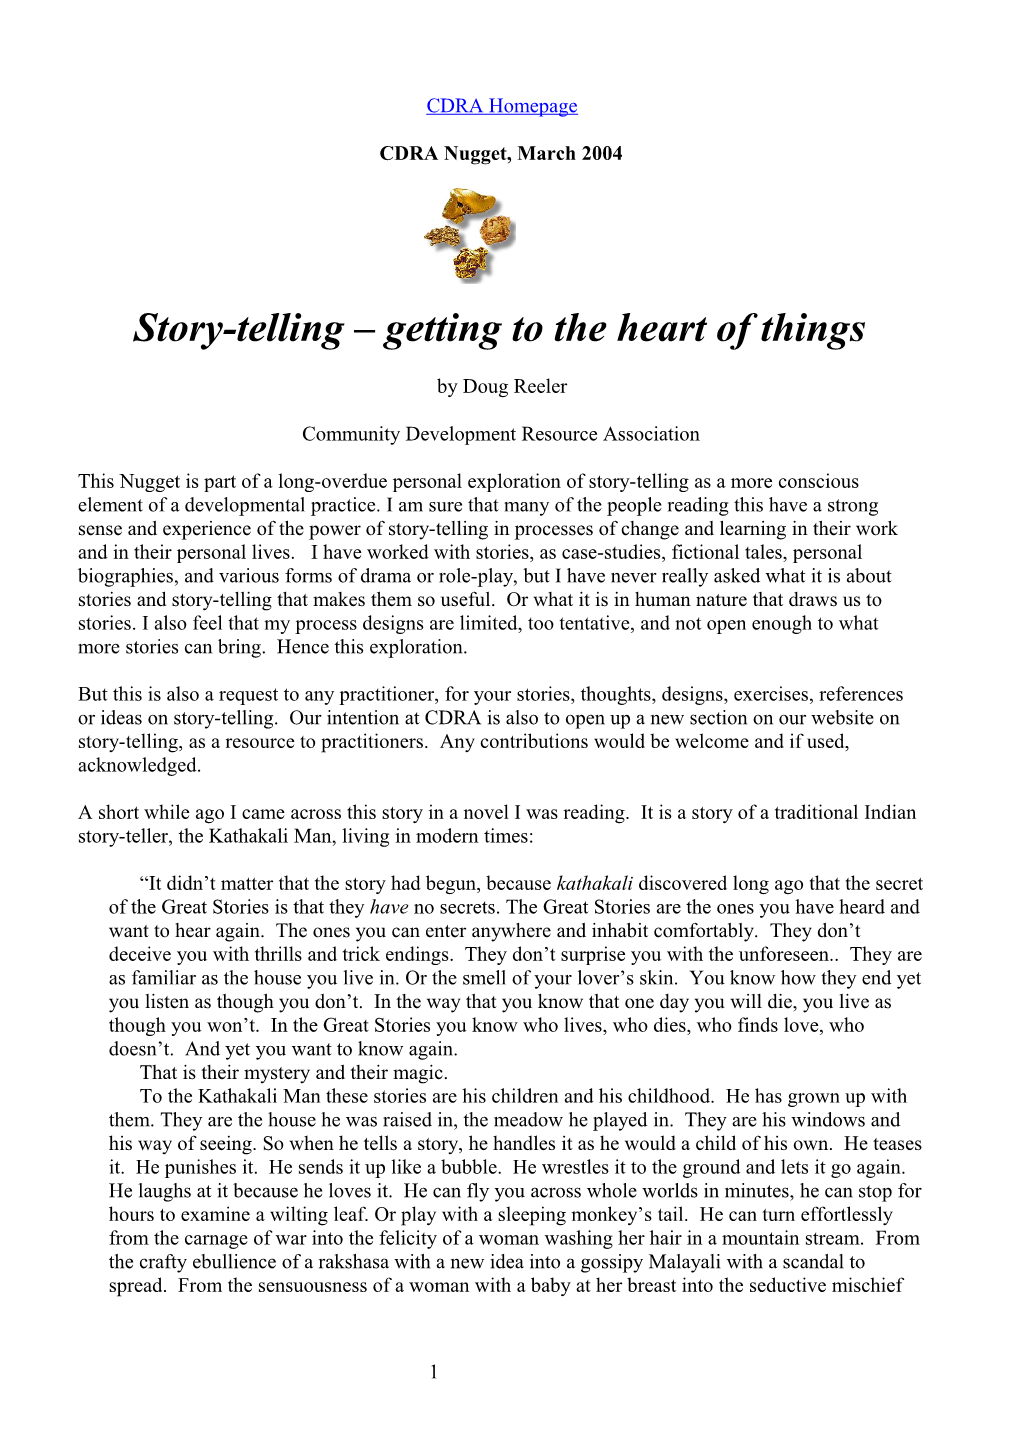 2004 CDRA Nugget - Storytelling - Getting to the Heart of Things by Doug Reeler - Word Doc